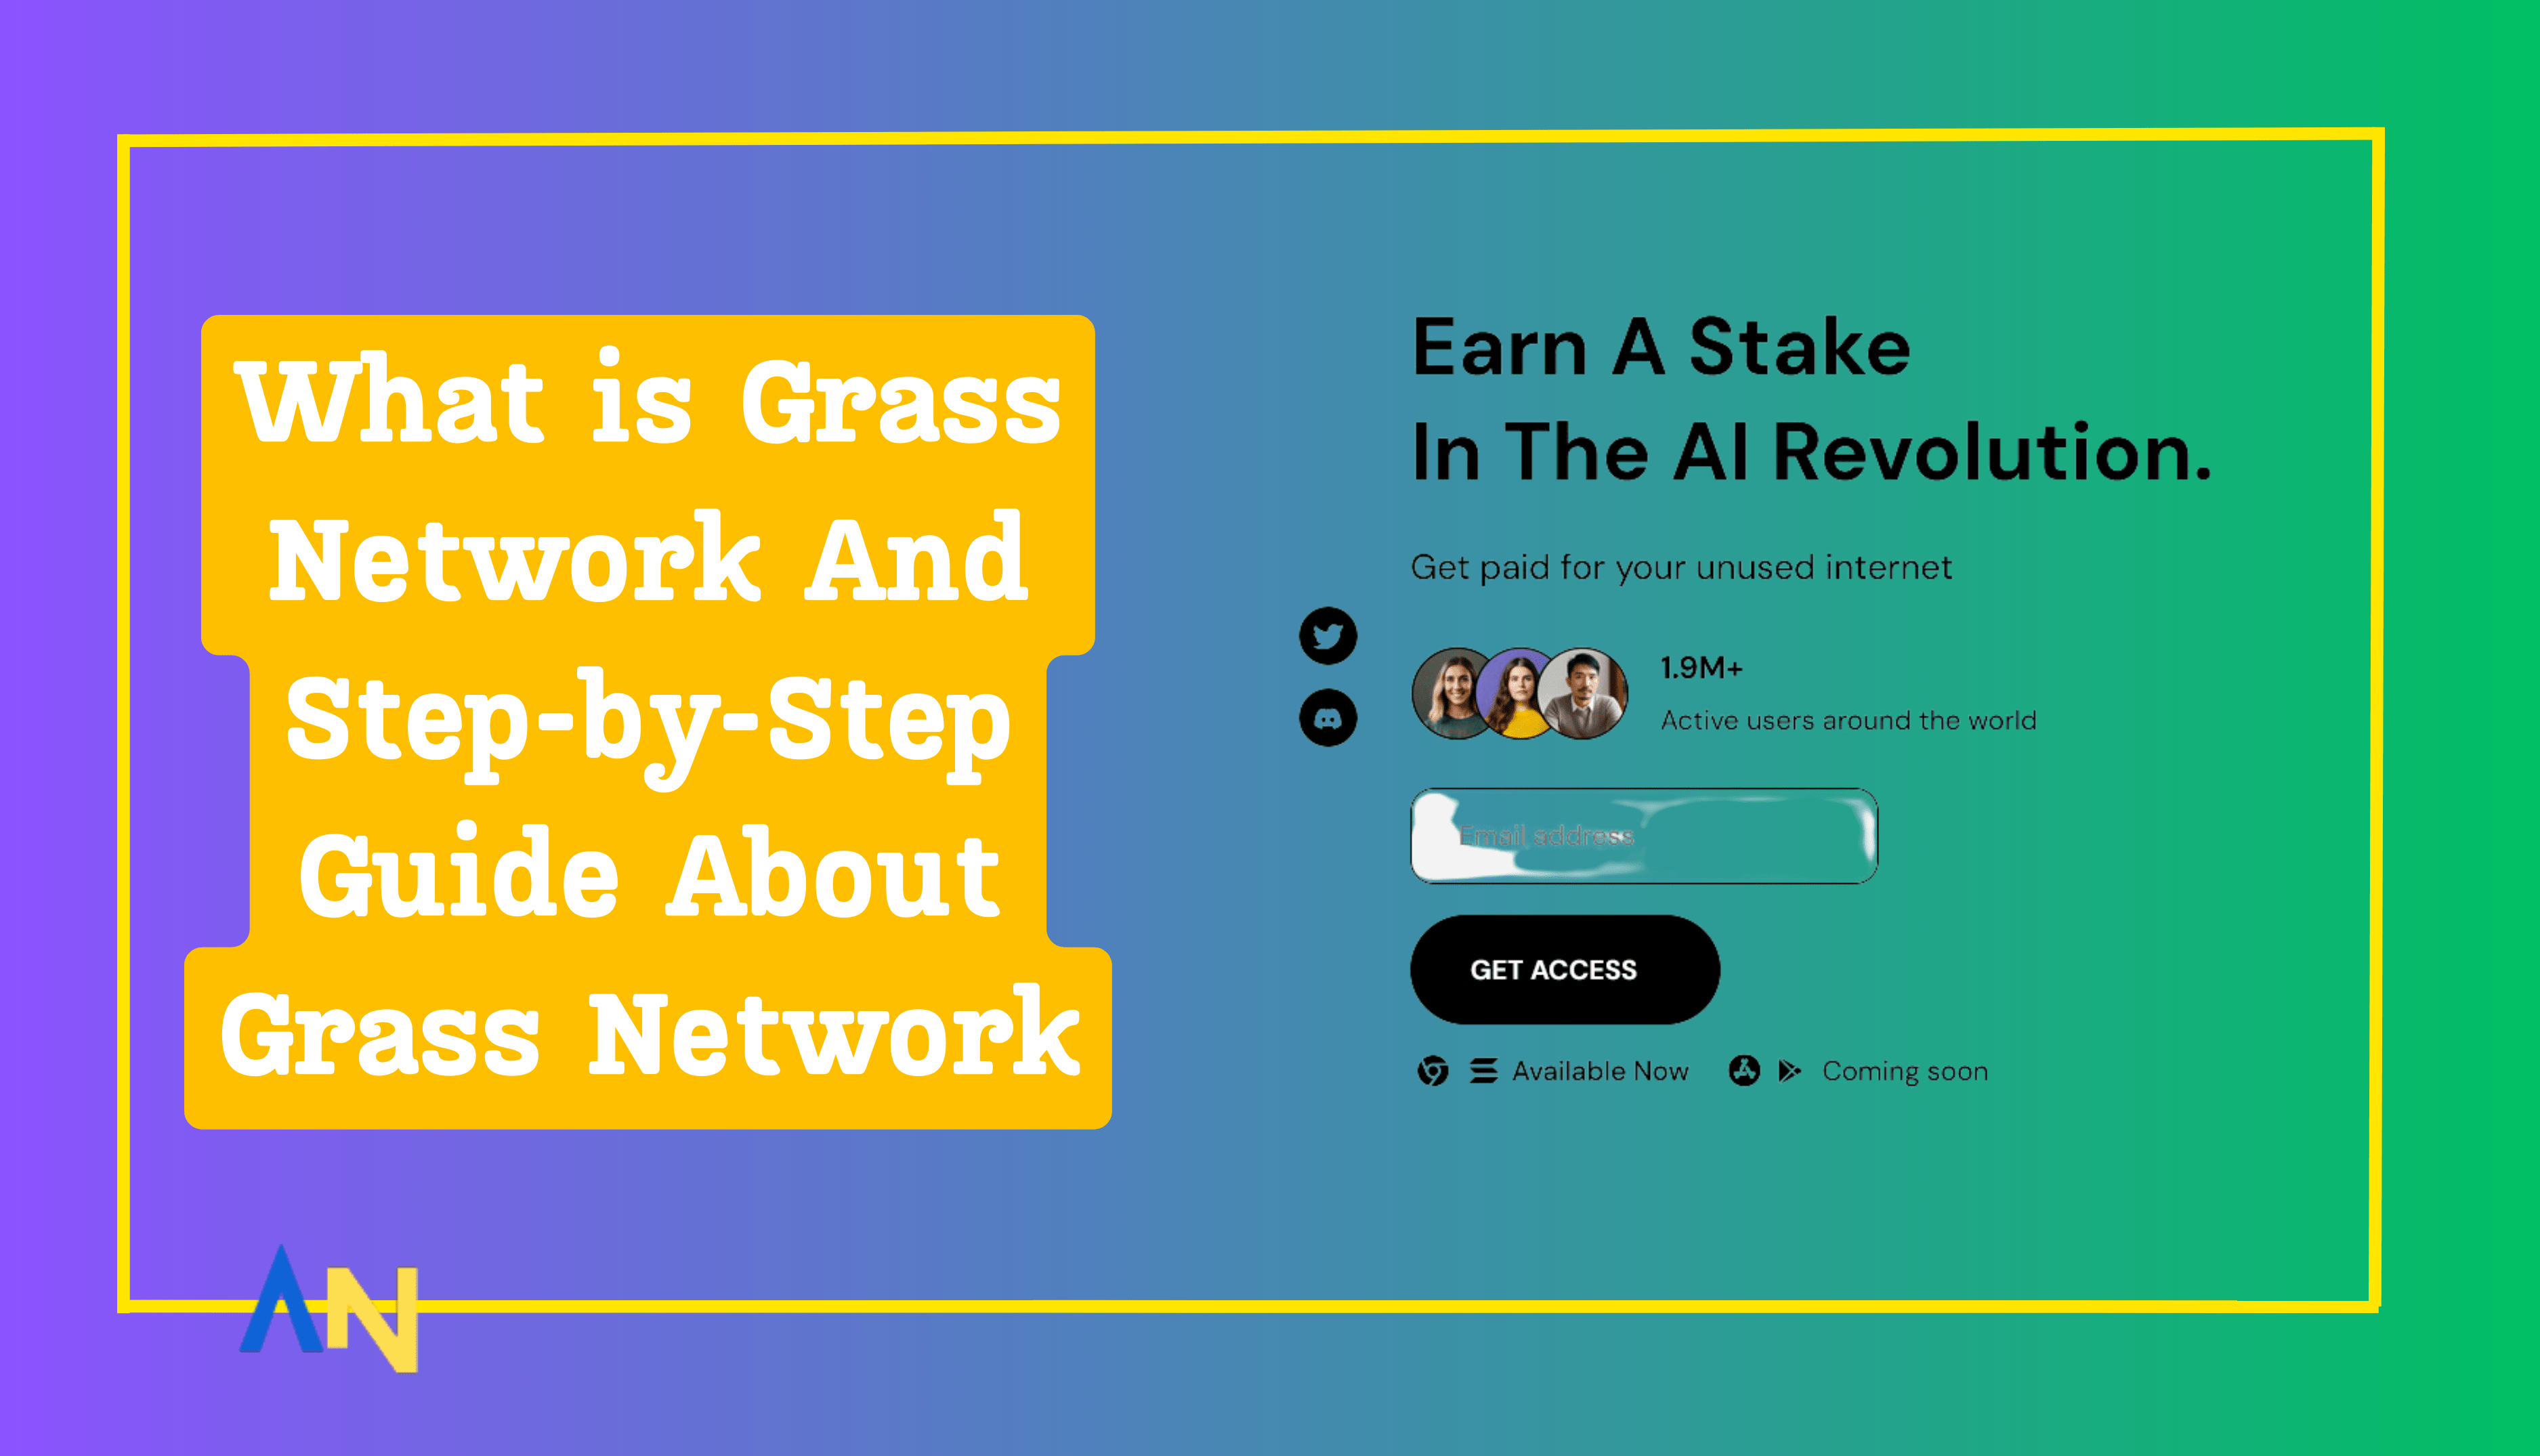 What is Grass Network And Step-by-Step Guide About Grass Network